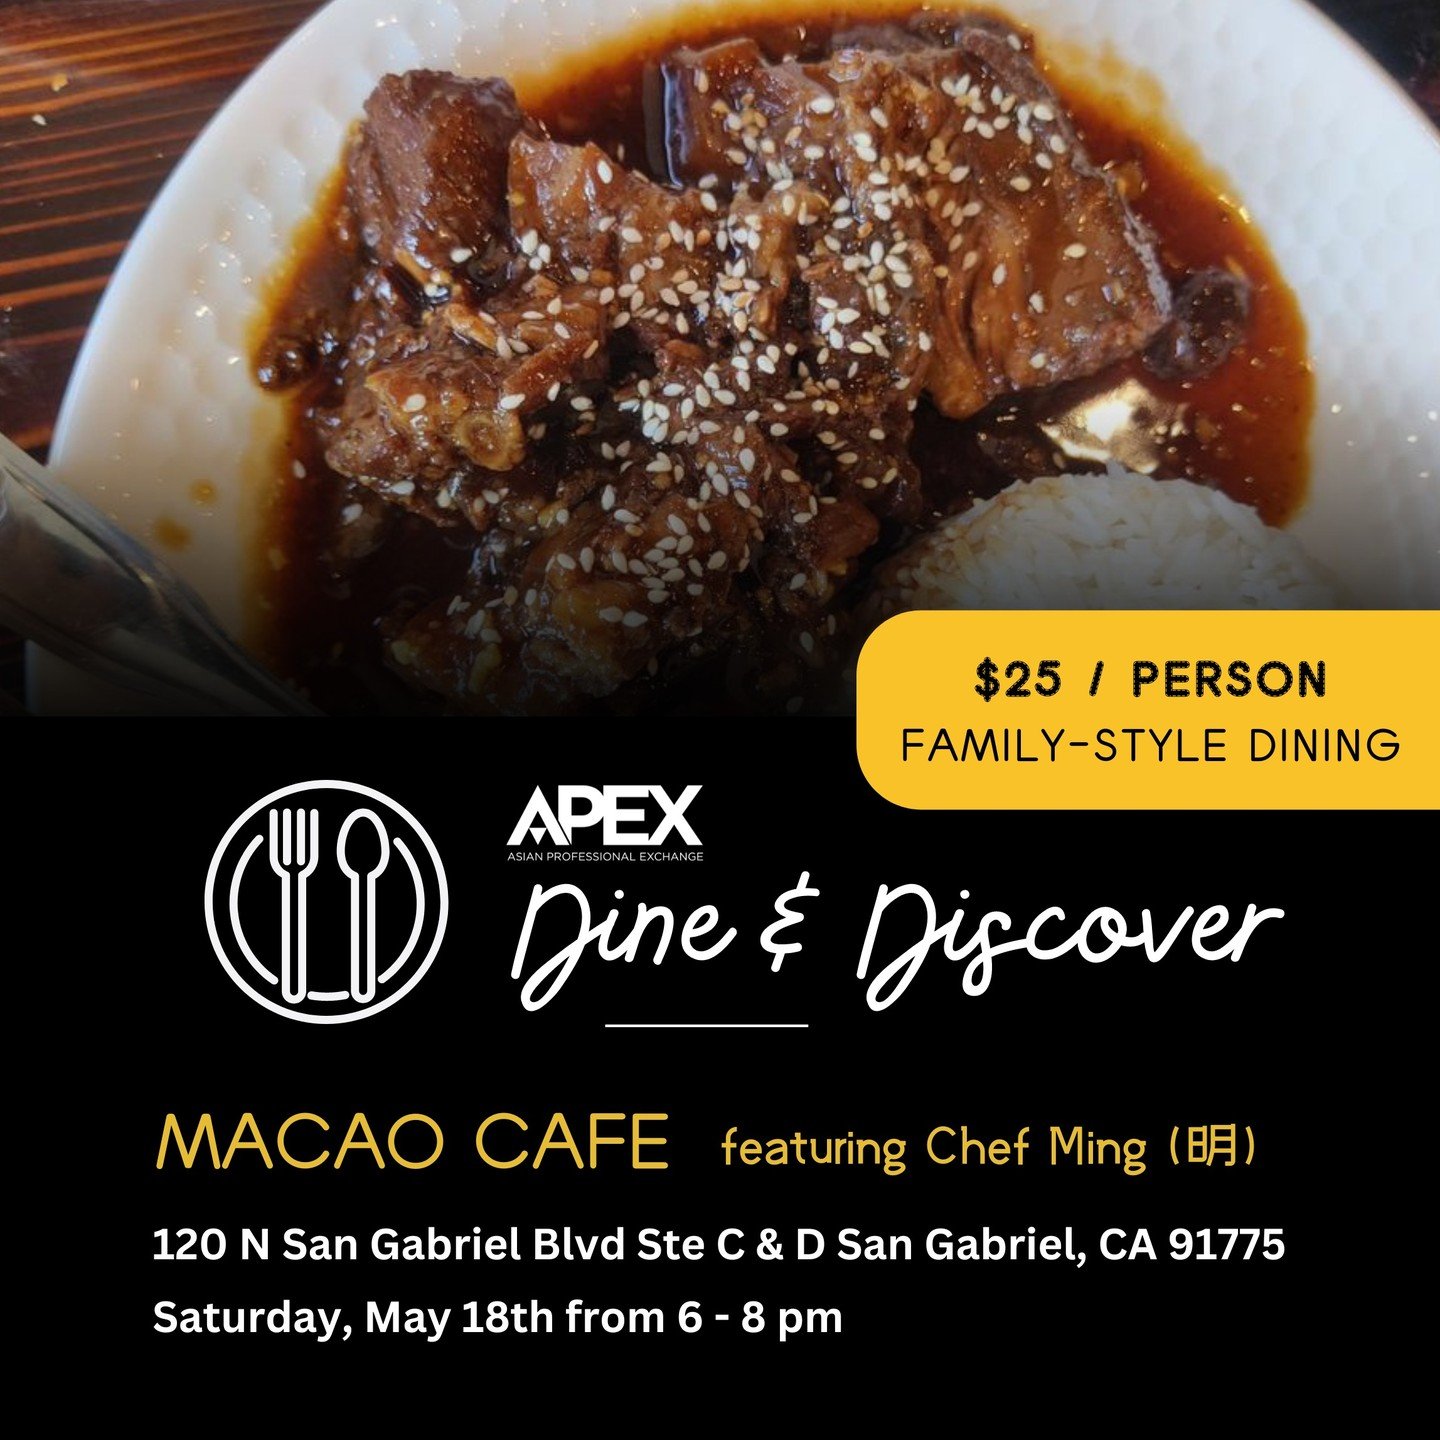 We're delighted to introduce Macao Cafe in our second installment of the APEX Dine and Discover series! 

Now led by Chef Ming (明), Macao Cafe offers classic dishes from Macau, a port city and former Portuguese colony.

Join us for a unique family-st